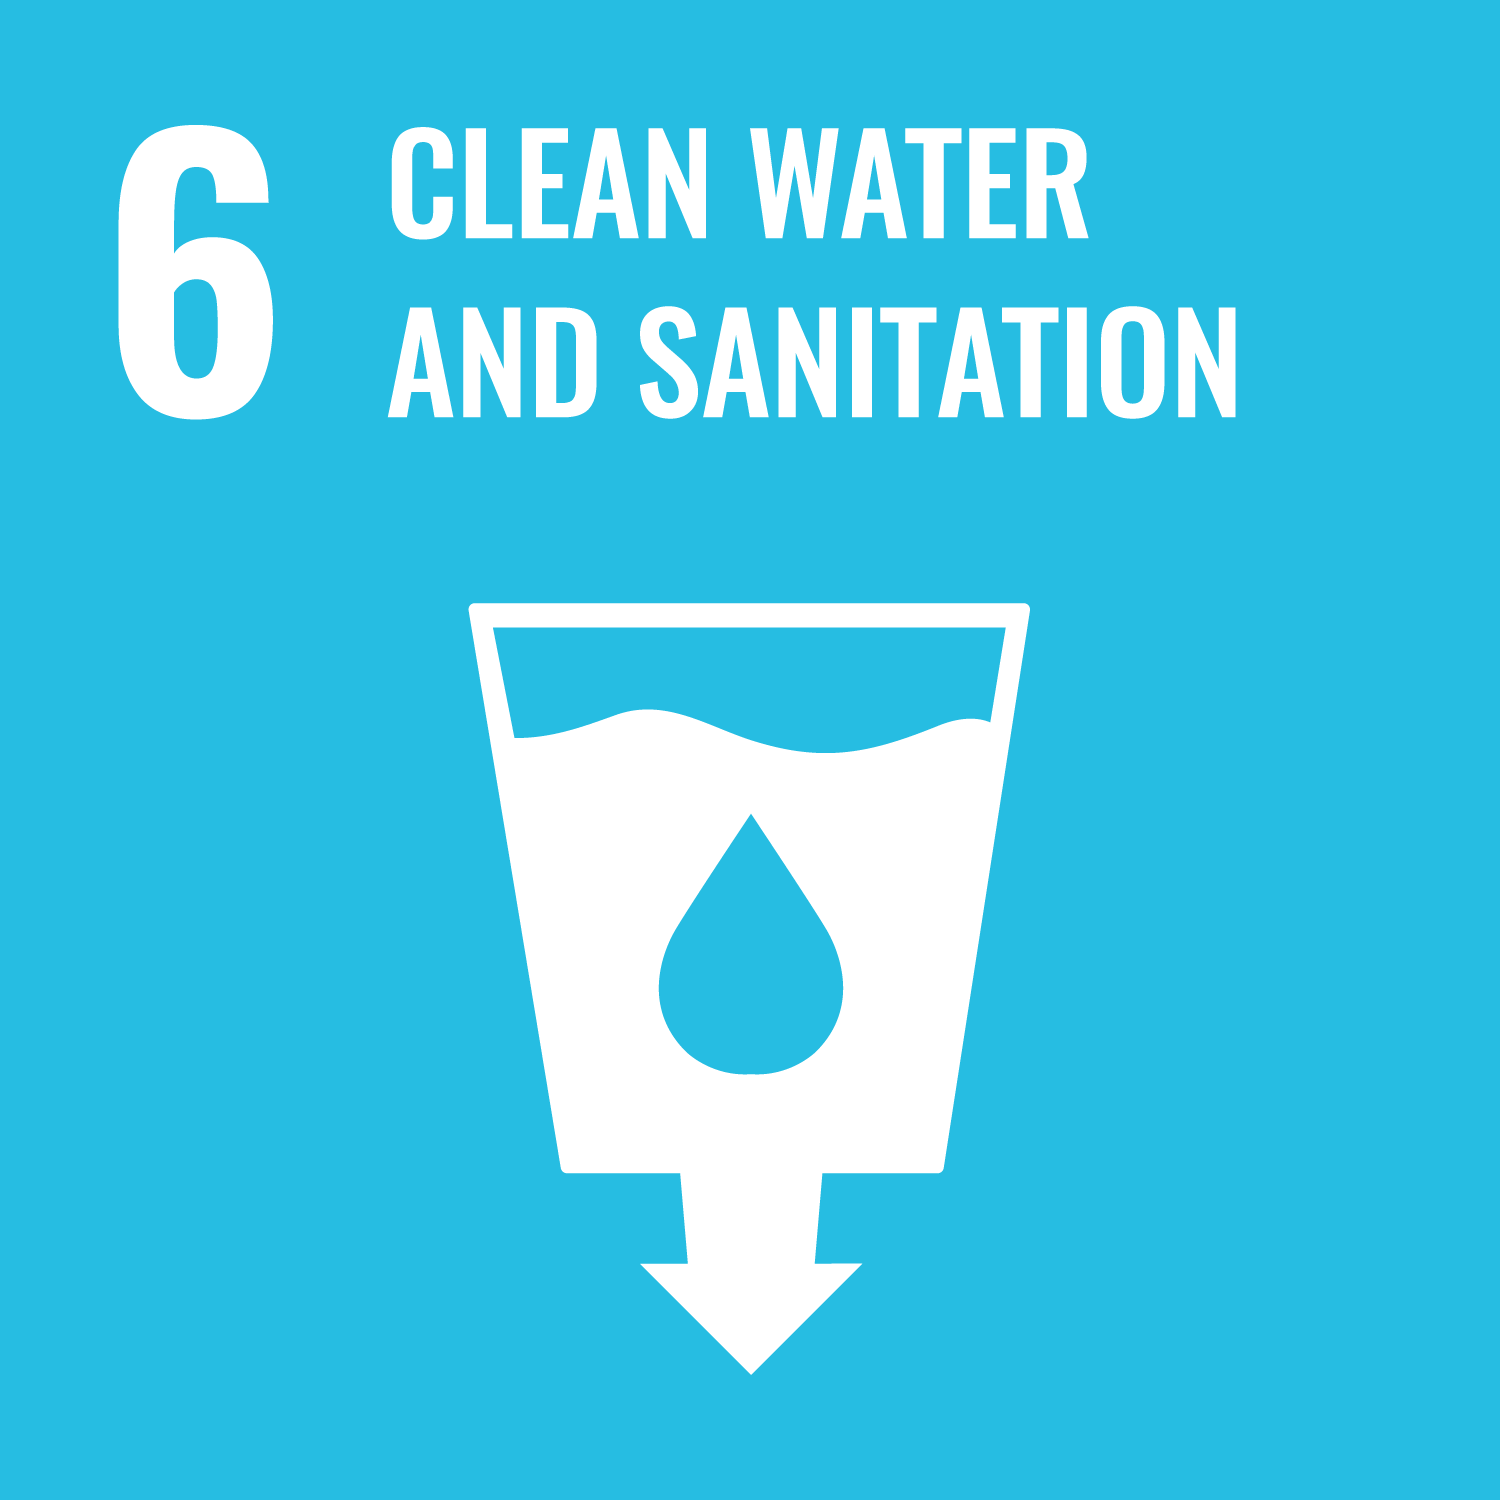 Ensure access to water and sanitation for all